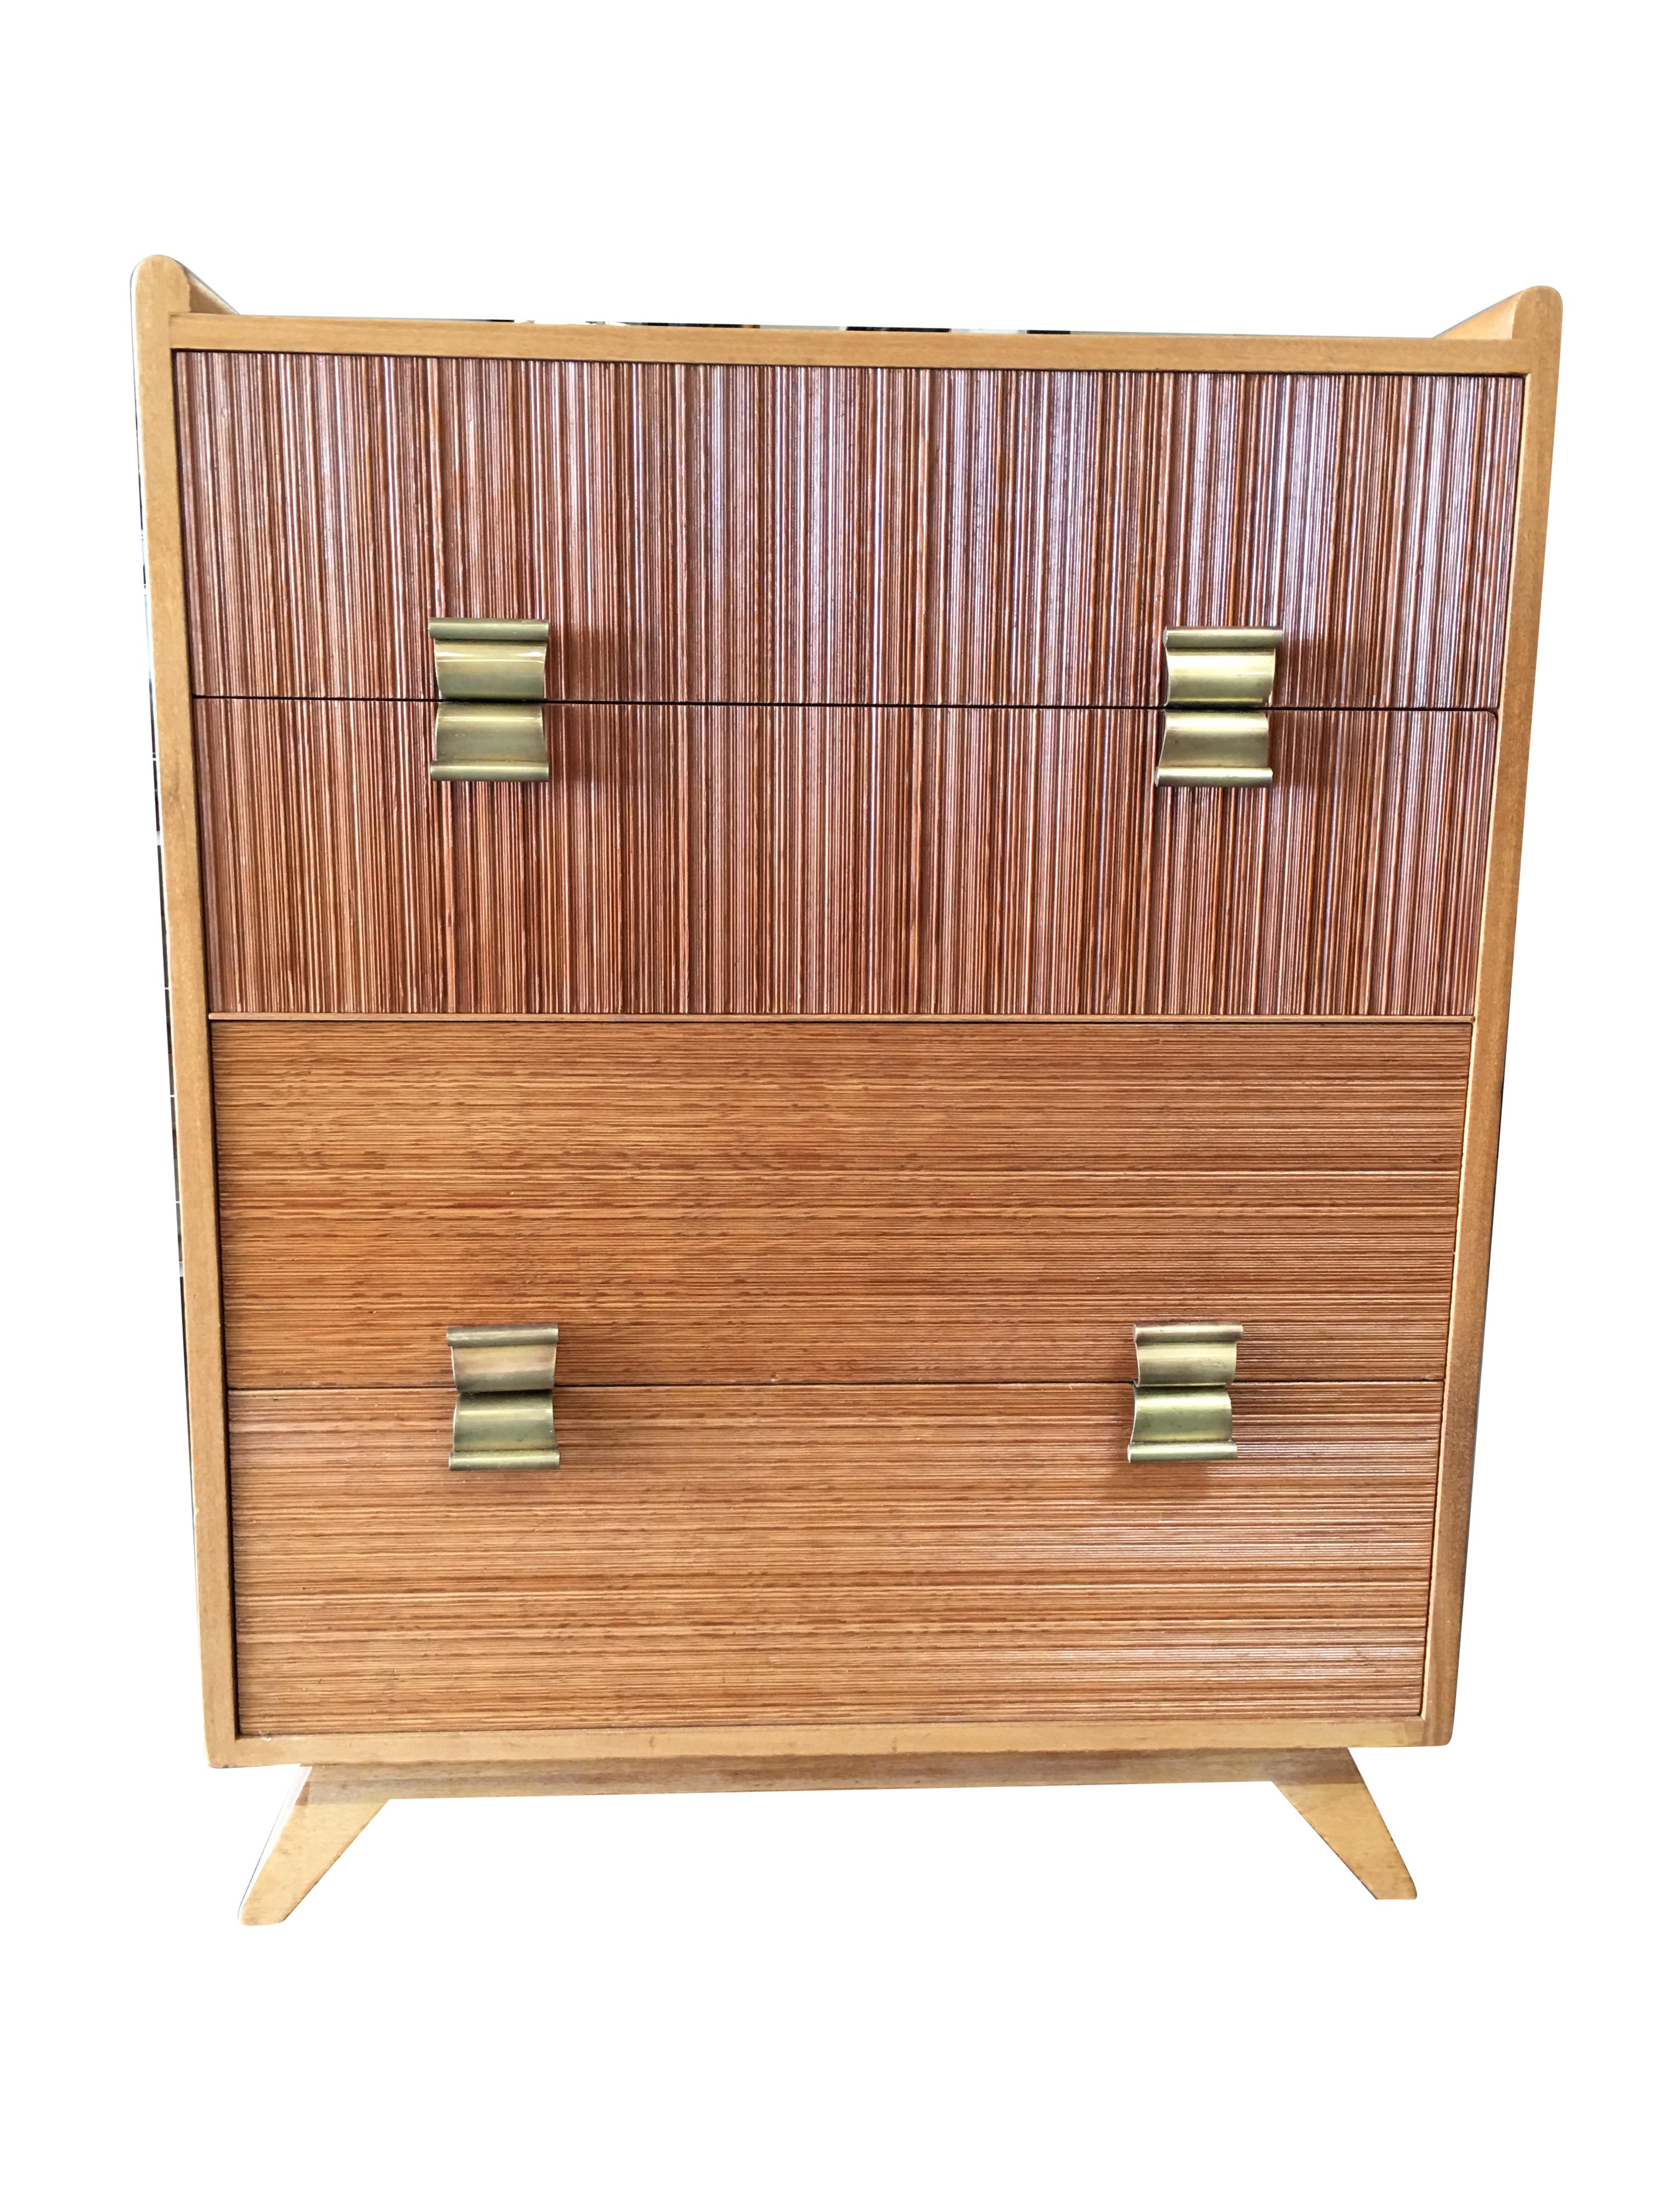 Mid Century chest of drawers by Paul Frankl for the Brown Saltman company features his trademark combed wood sides with curled brass pulls.